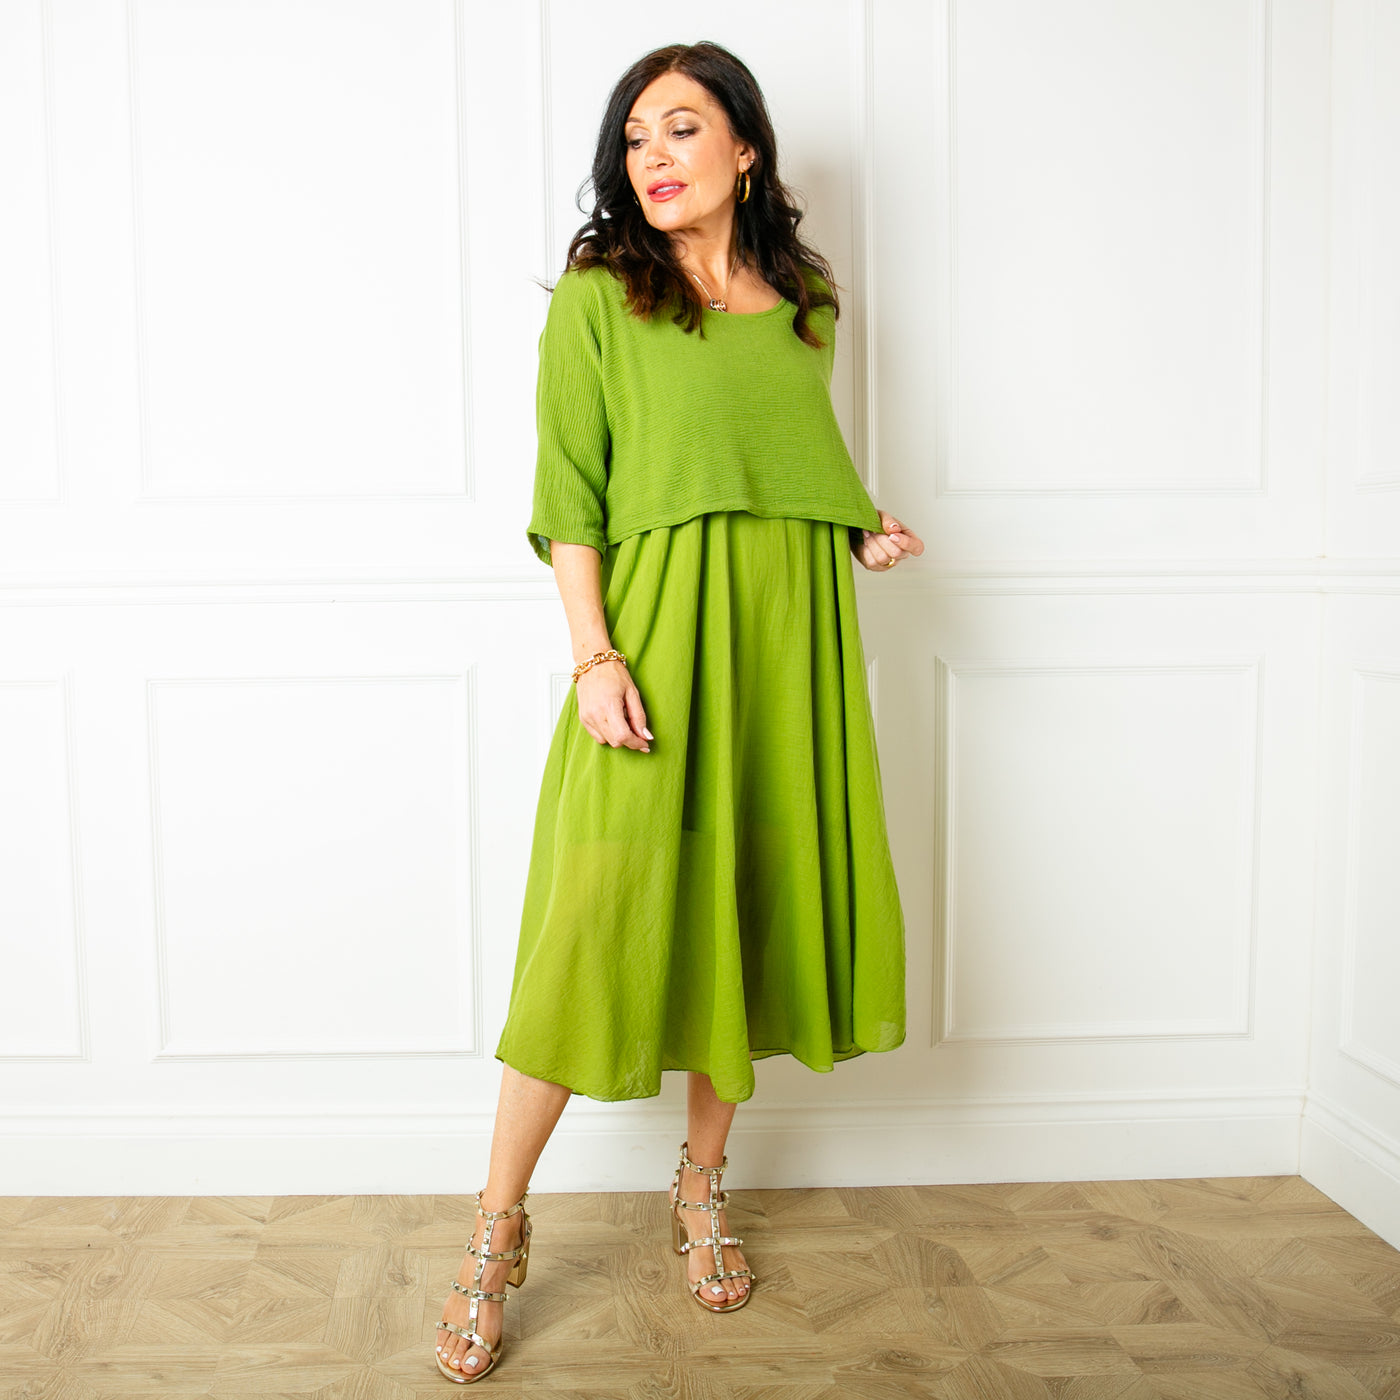 The green Two Piece Dress with a midi dress that has straps, a round neckline and a lining underneath